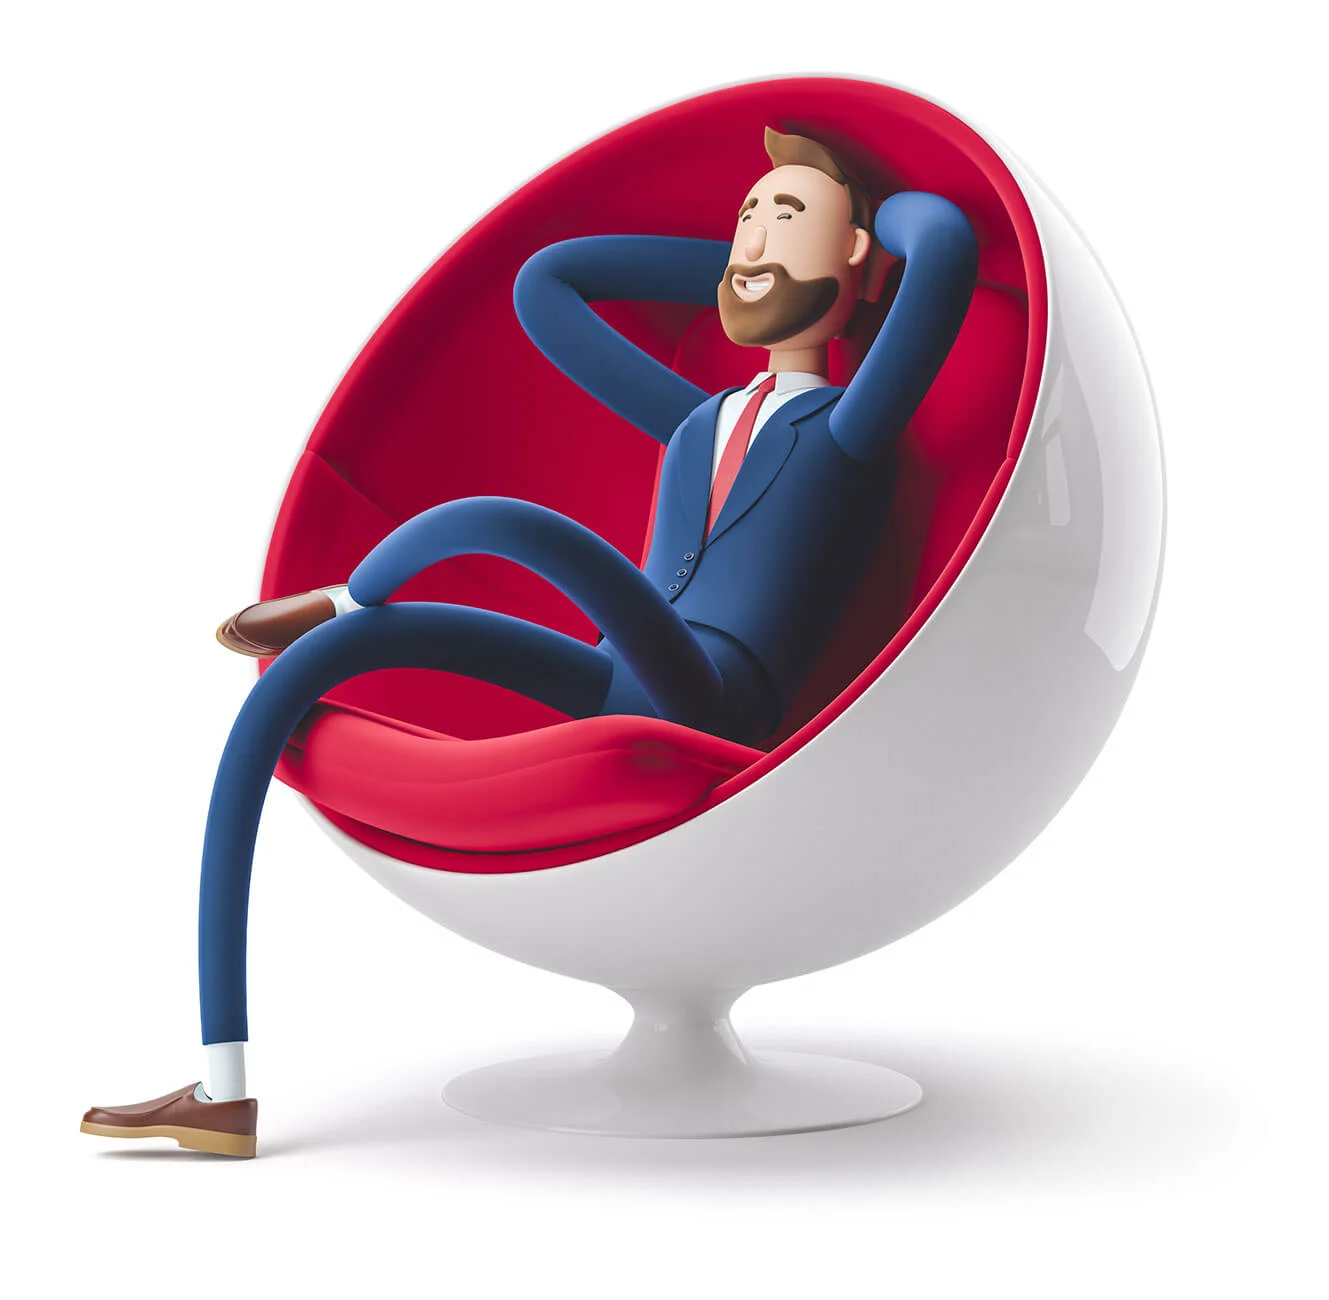 Cartoon man in a suit sitting in red chair